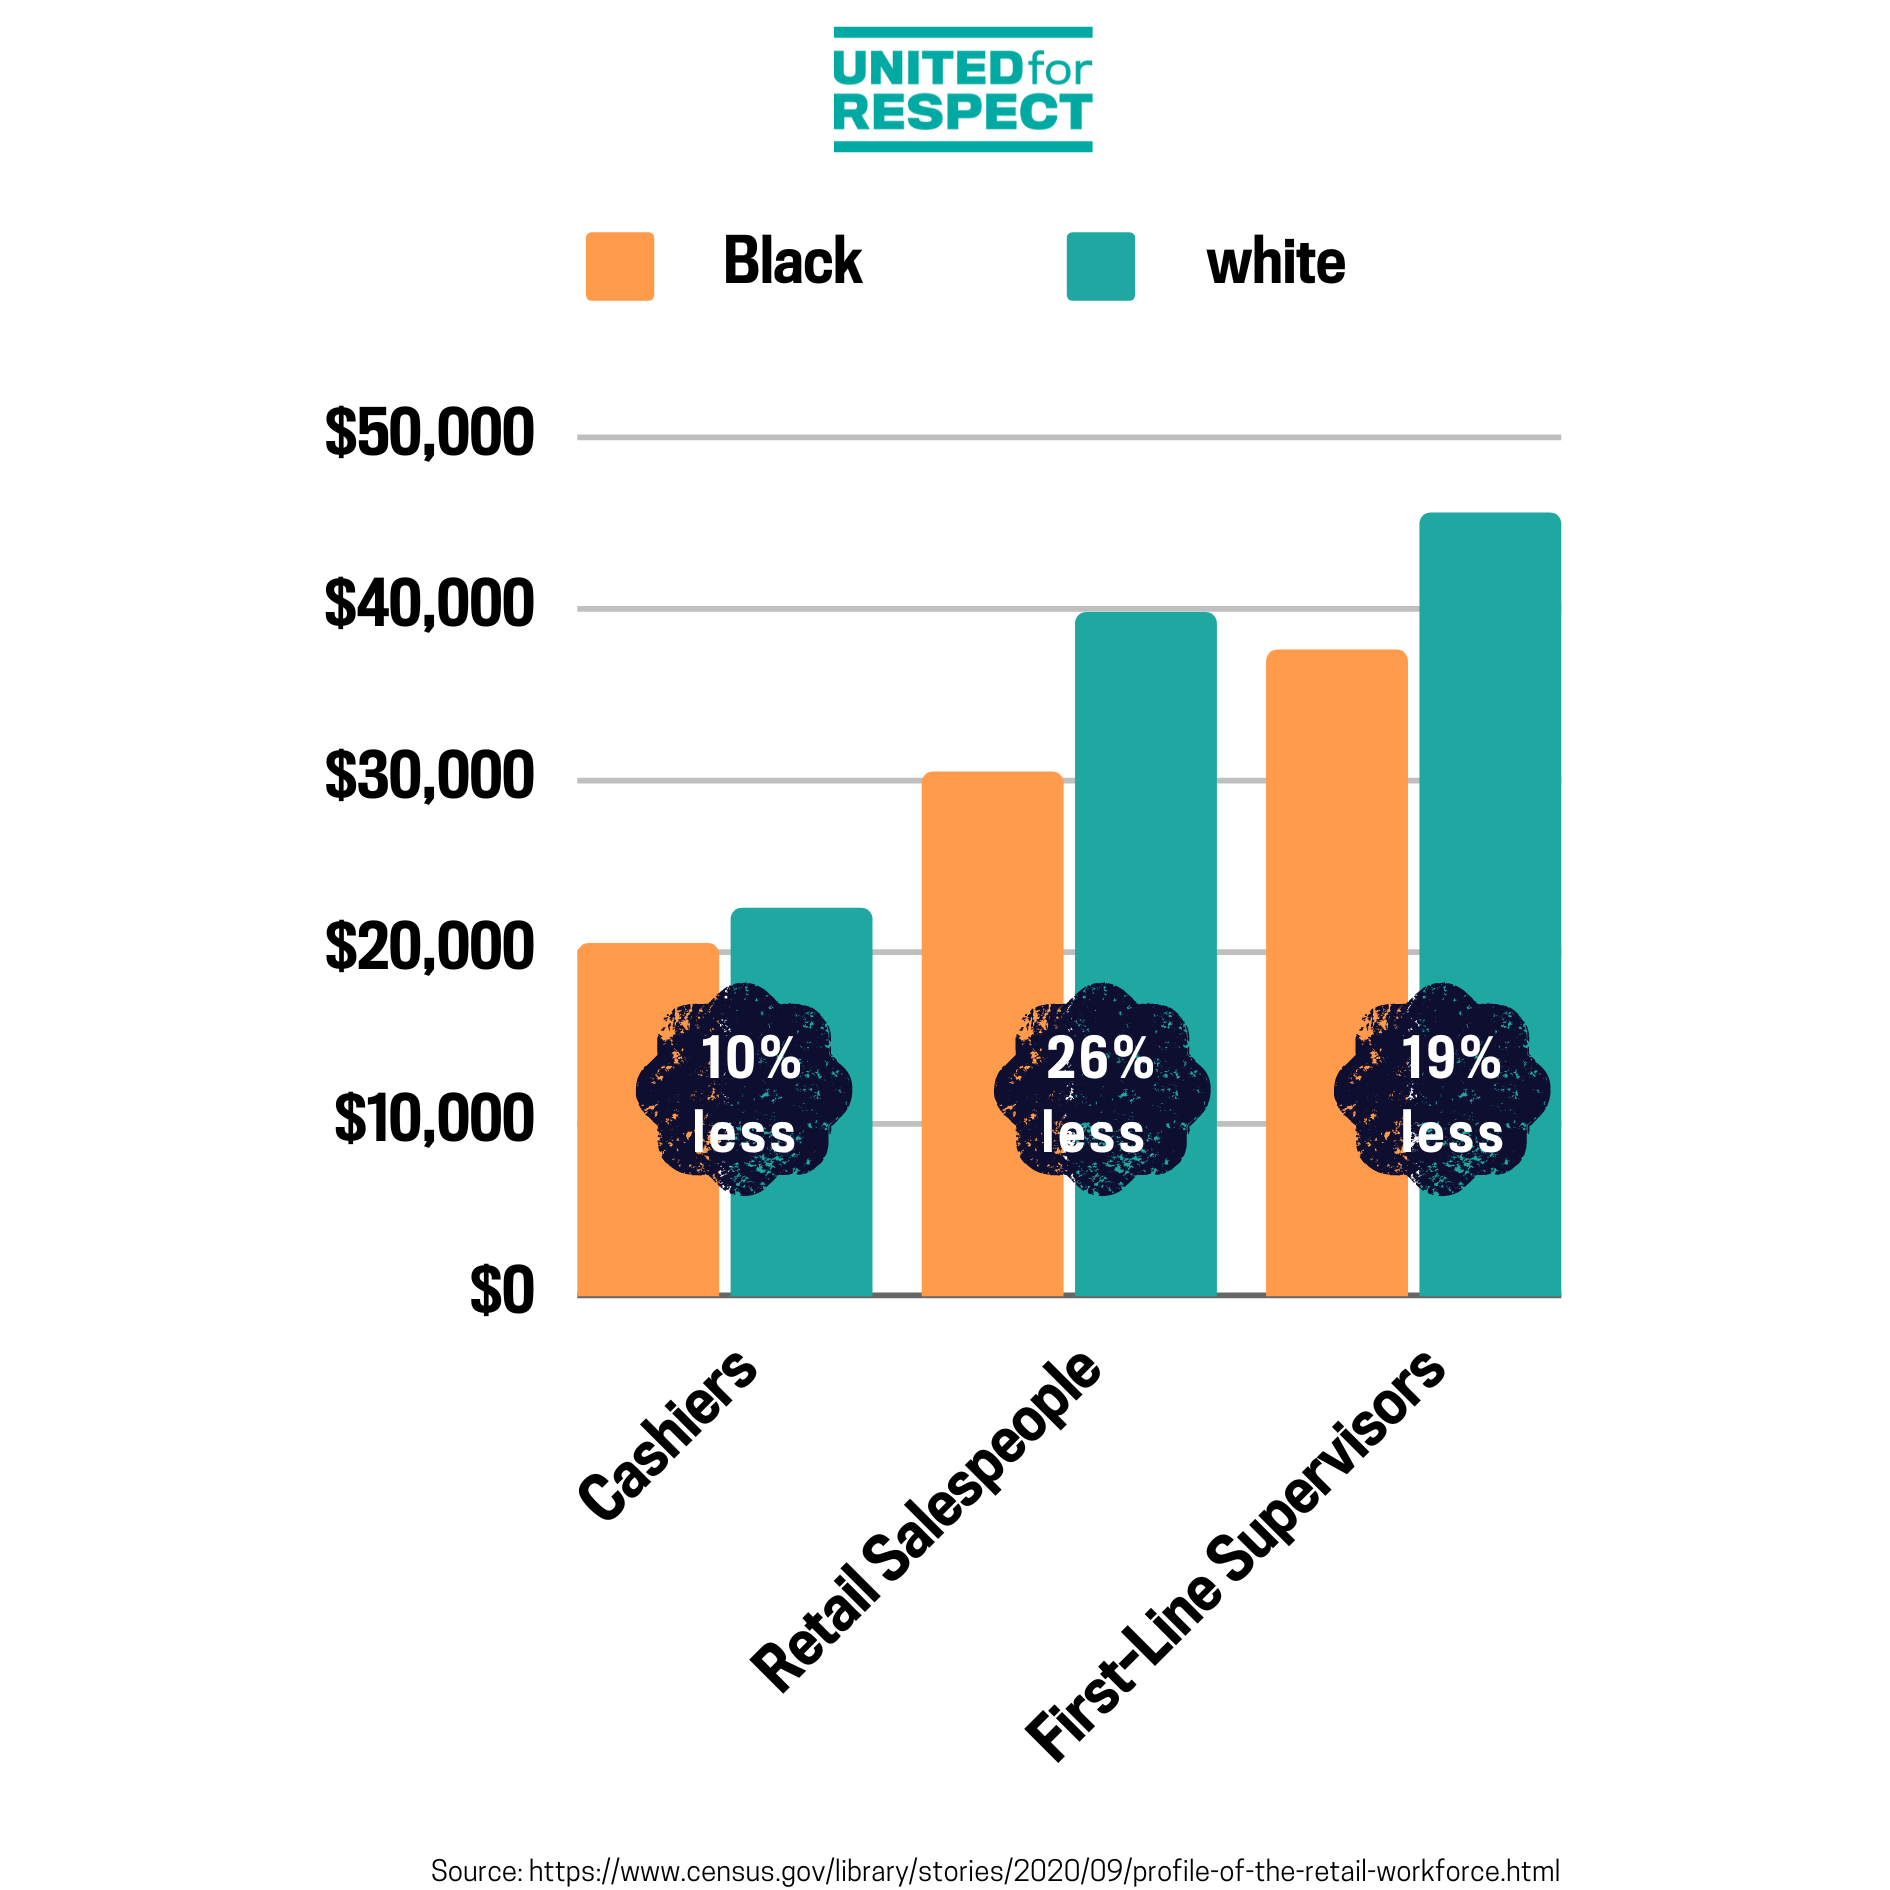 A bar chart visualizes the pay disparity in retail, showing Black cashiers earn 10% less than their white counterparts, Black salespeople earn 26% less, and Black supervisors earn 19% less.